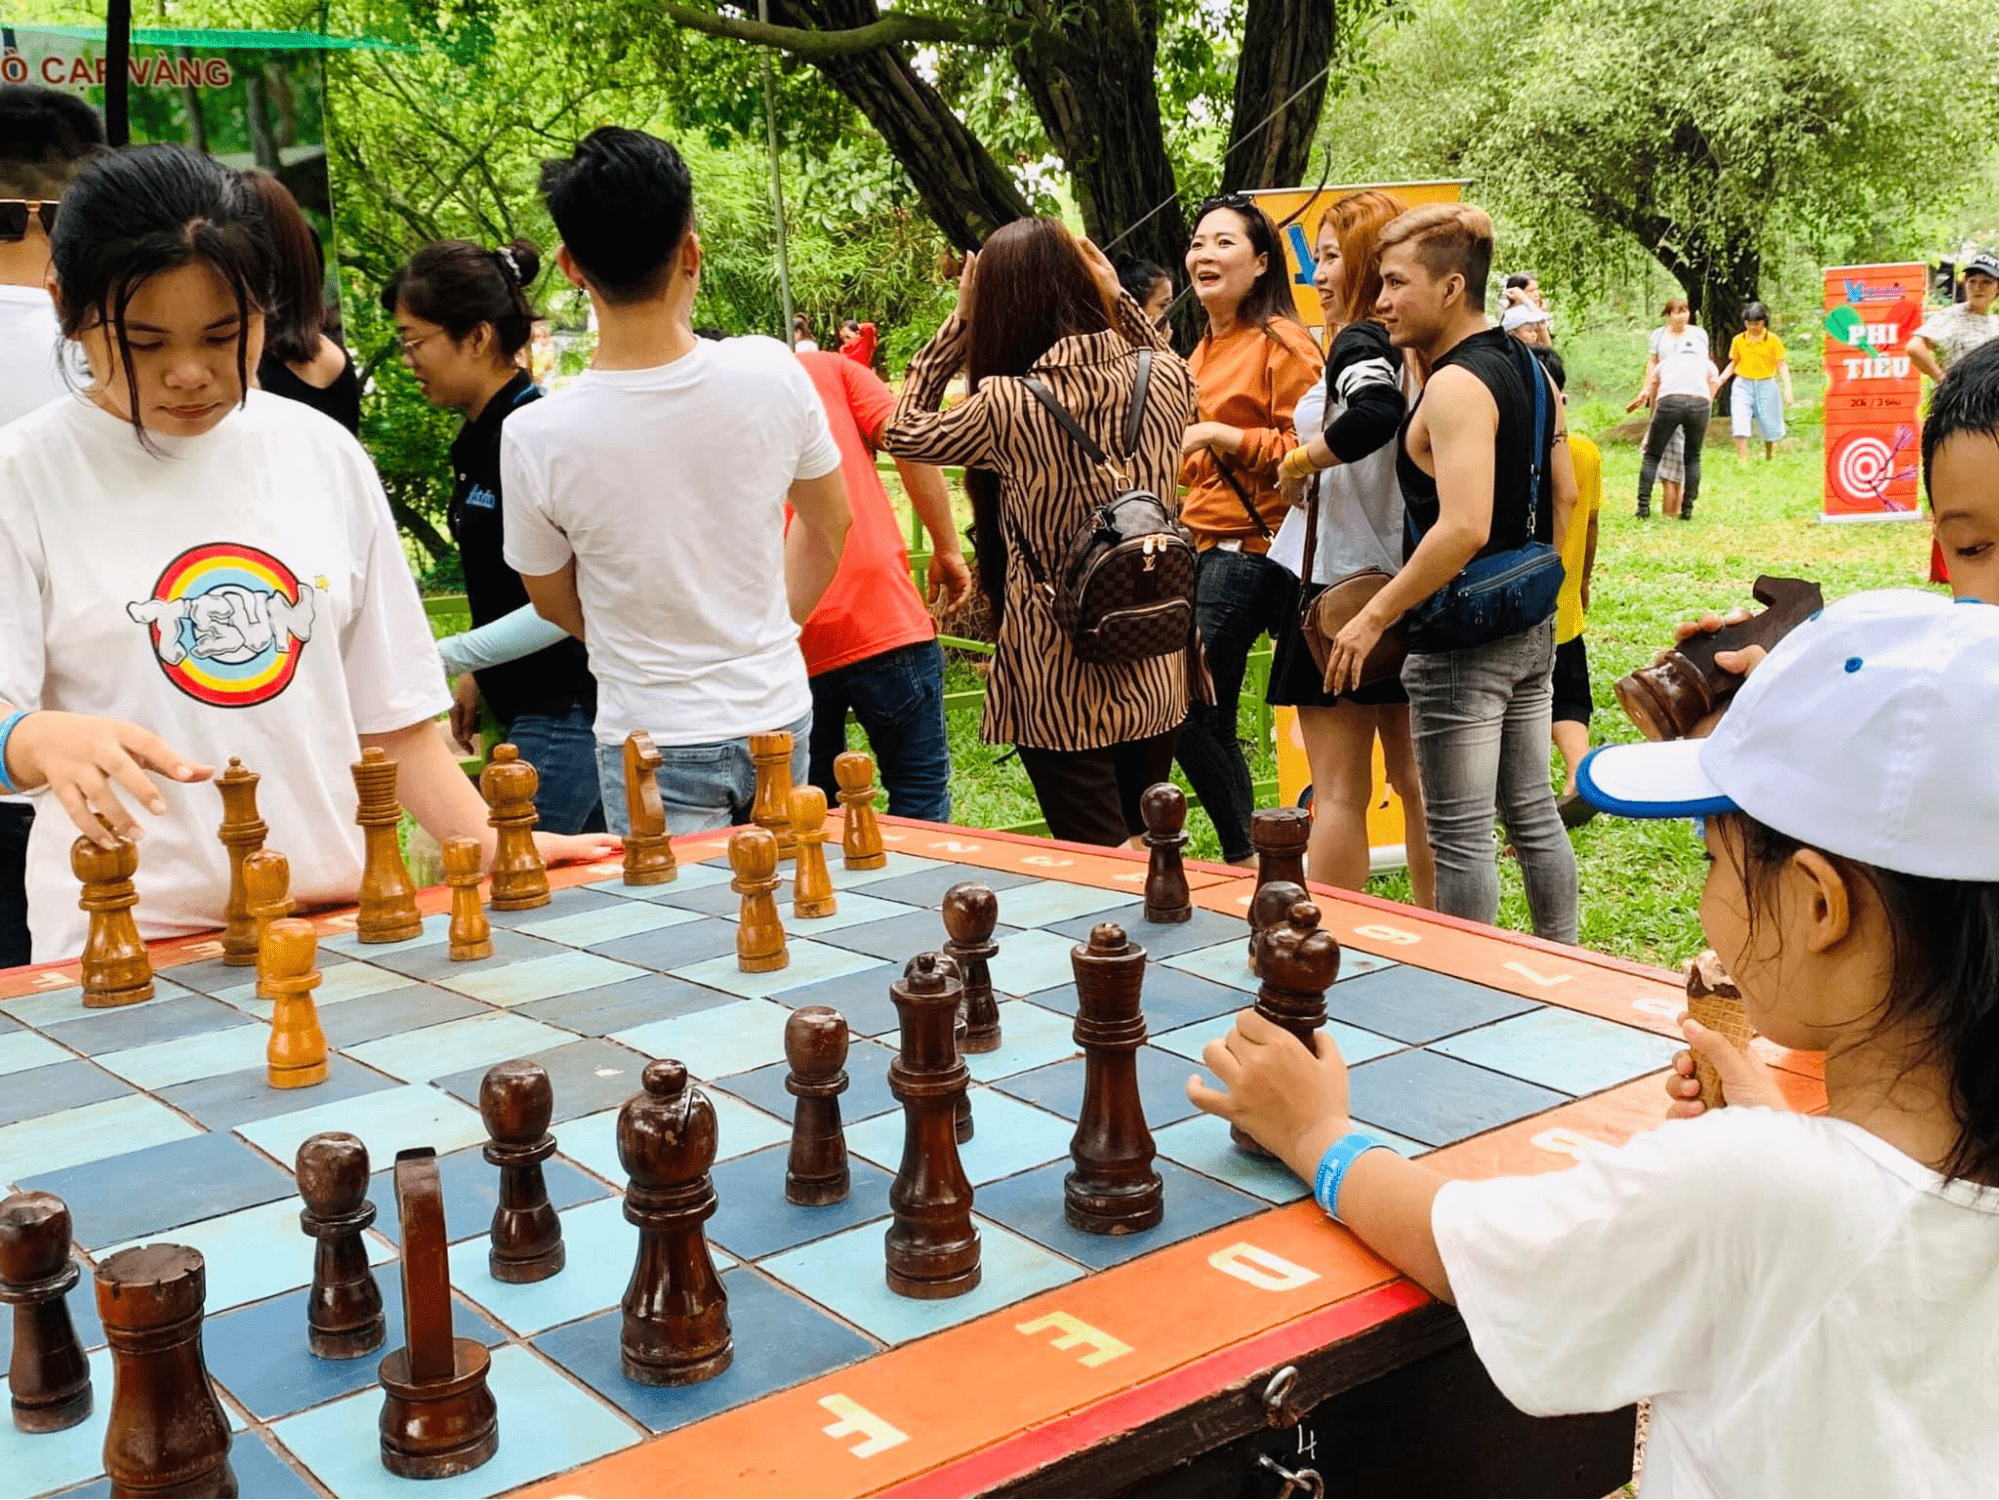 Things to do at Bò Cạp Vàng Ecological Park - Giant chess board